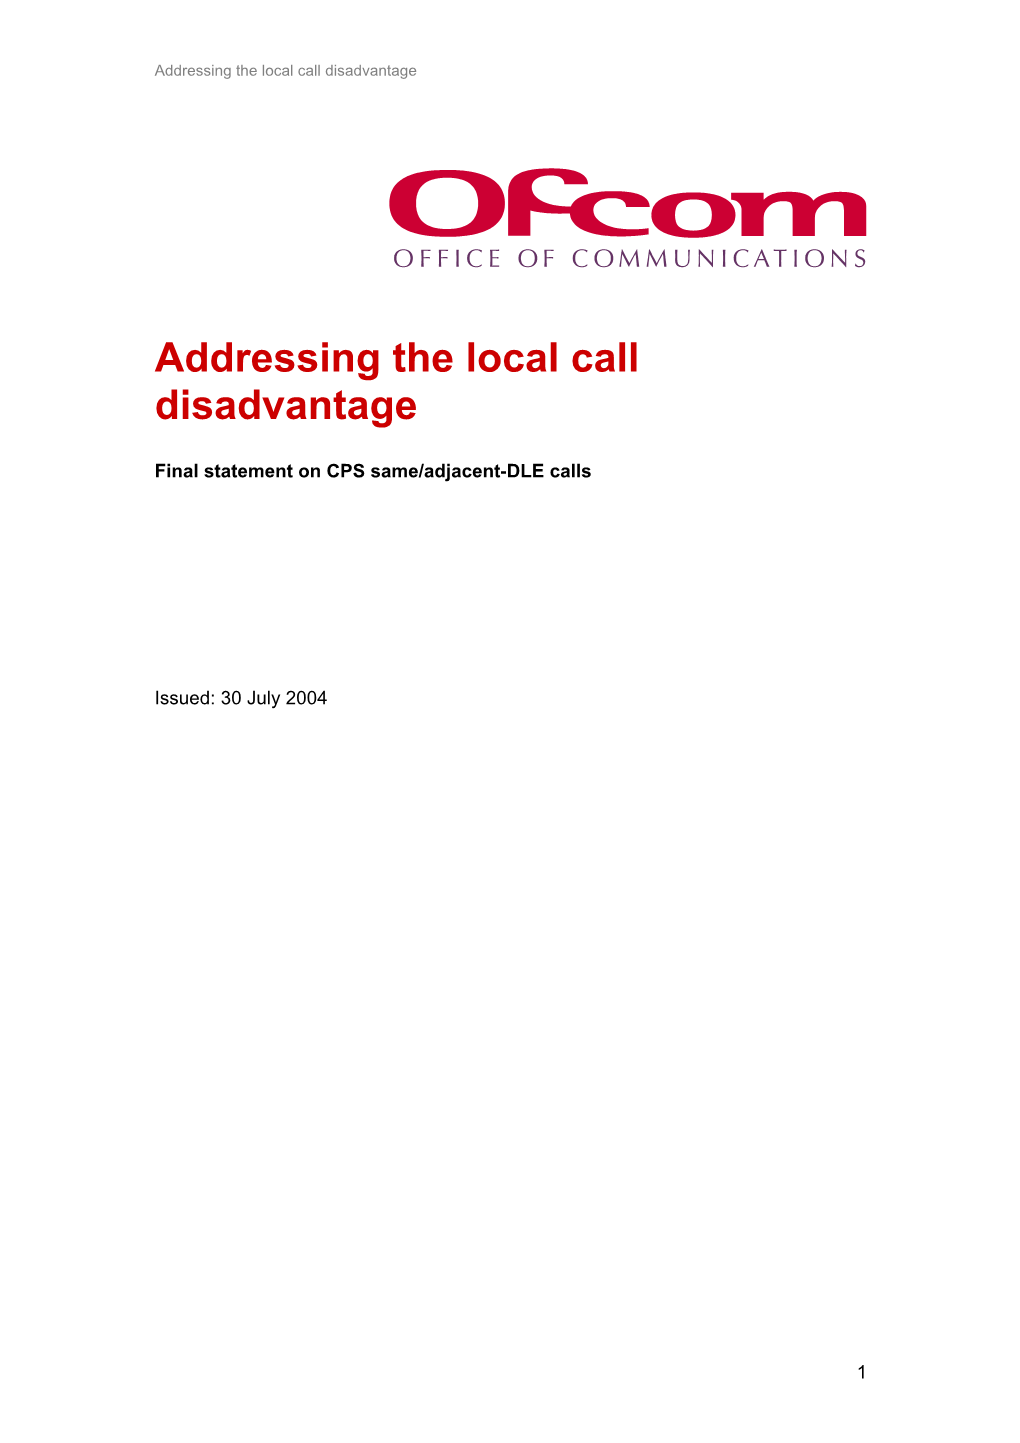 Addressing the Local Call Disadvantage